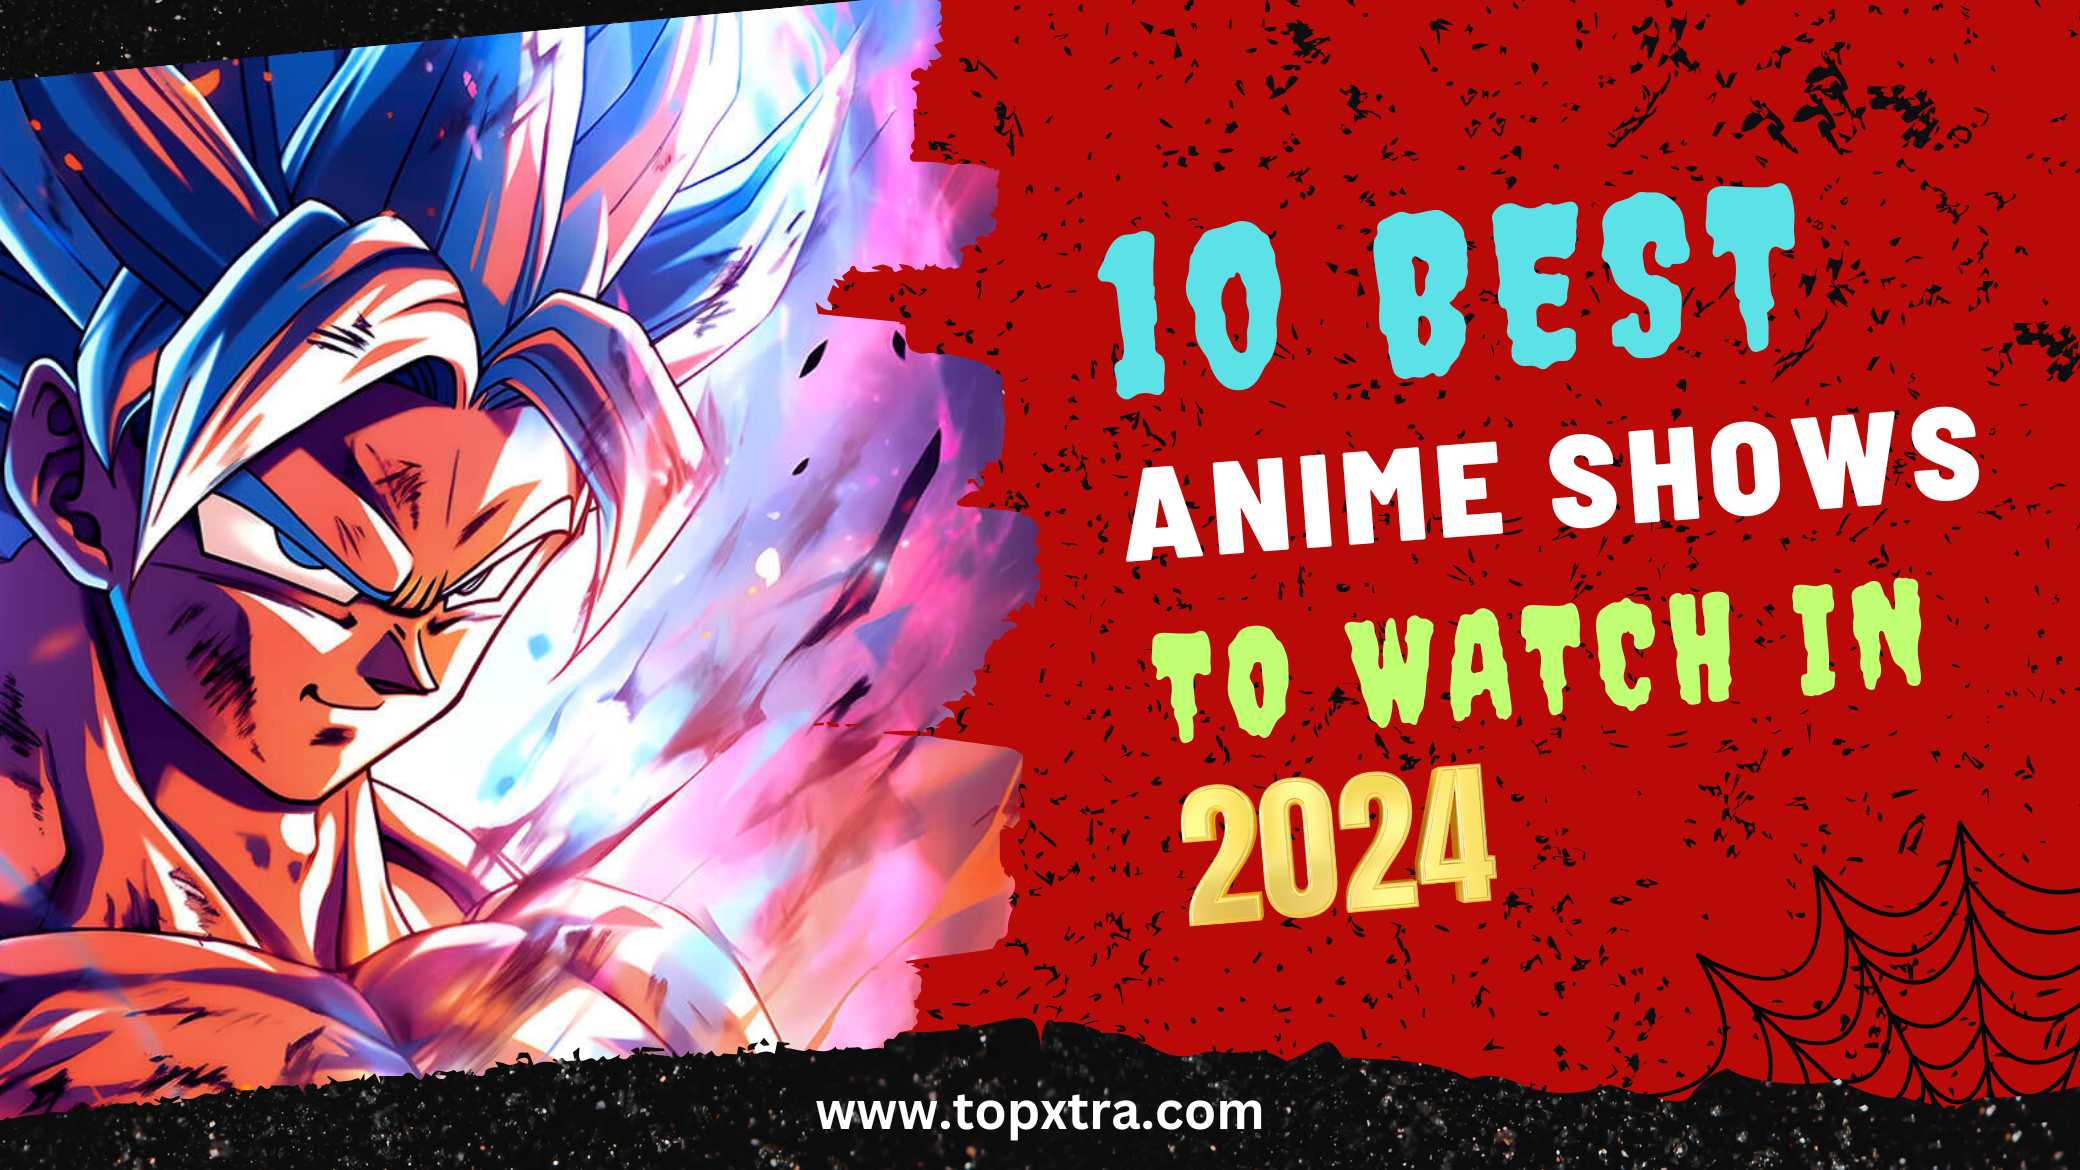 10 Best of the Best Anime Shows to Watch in 2024